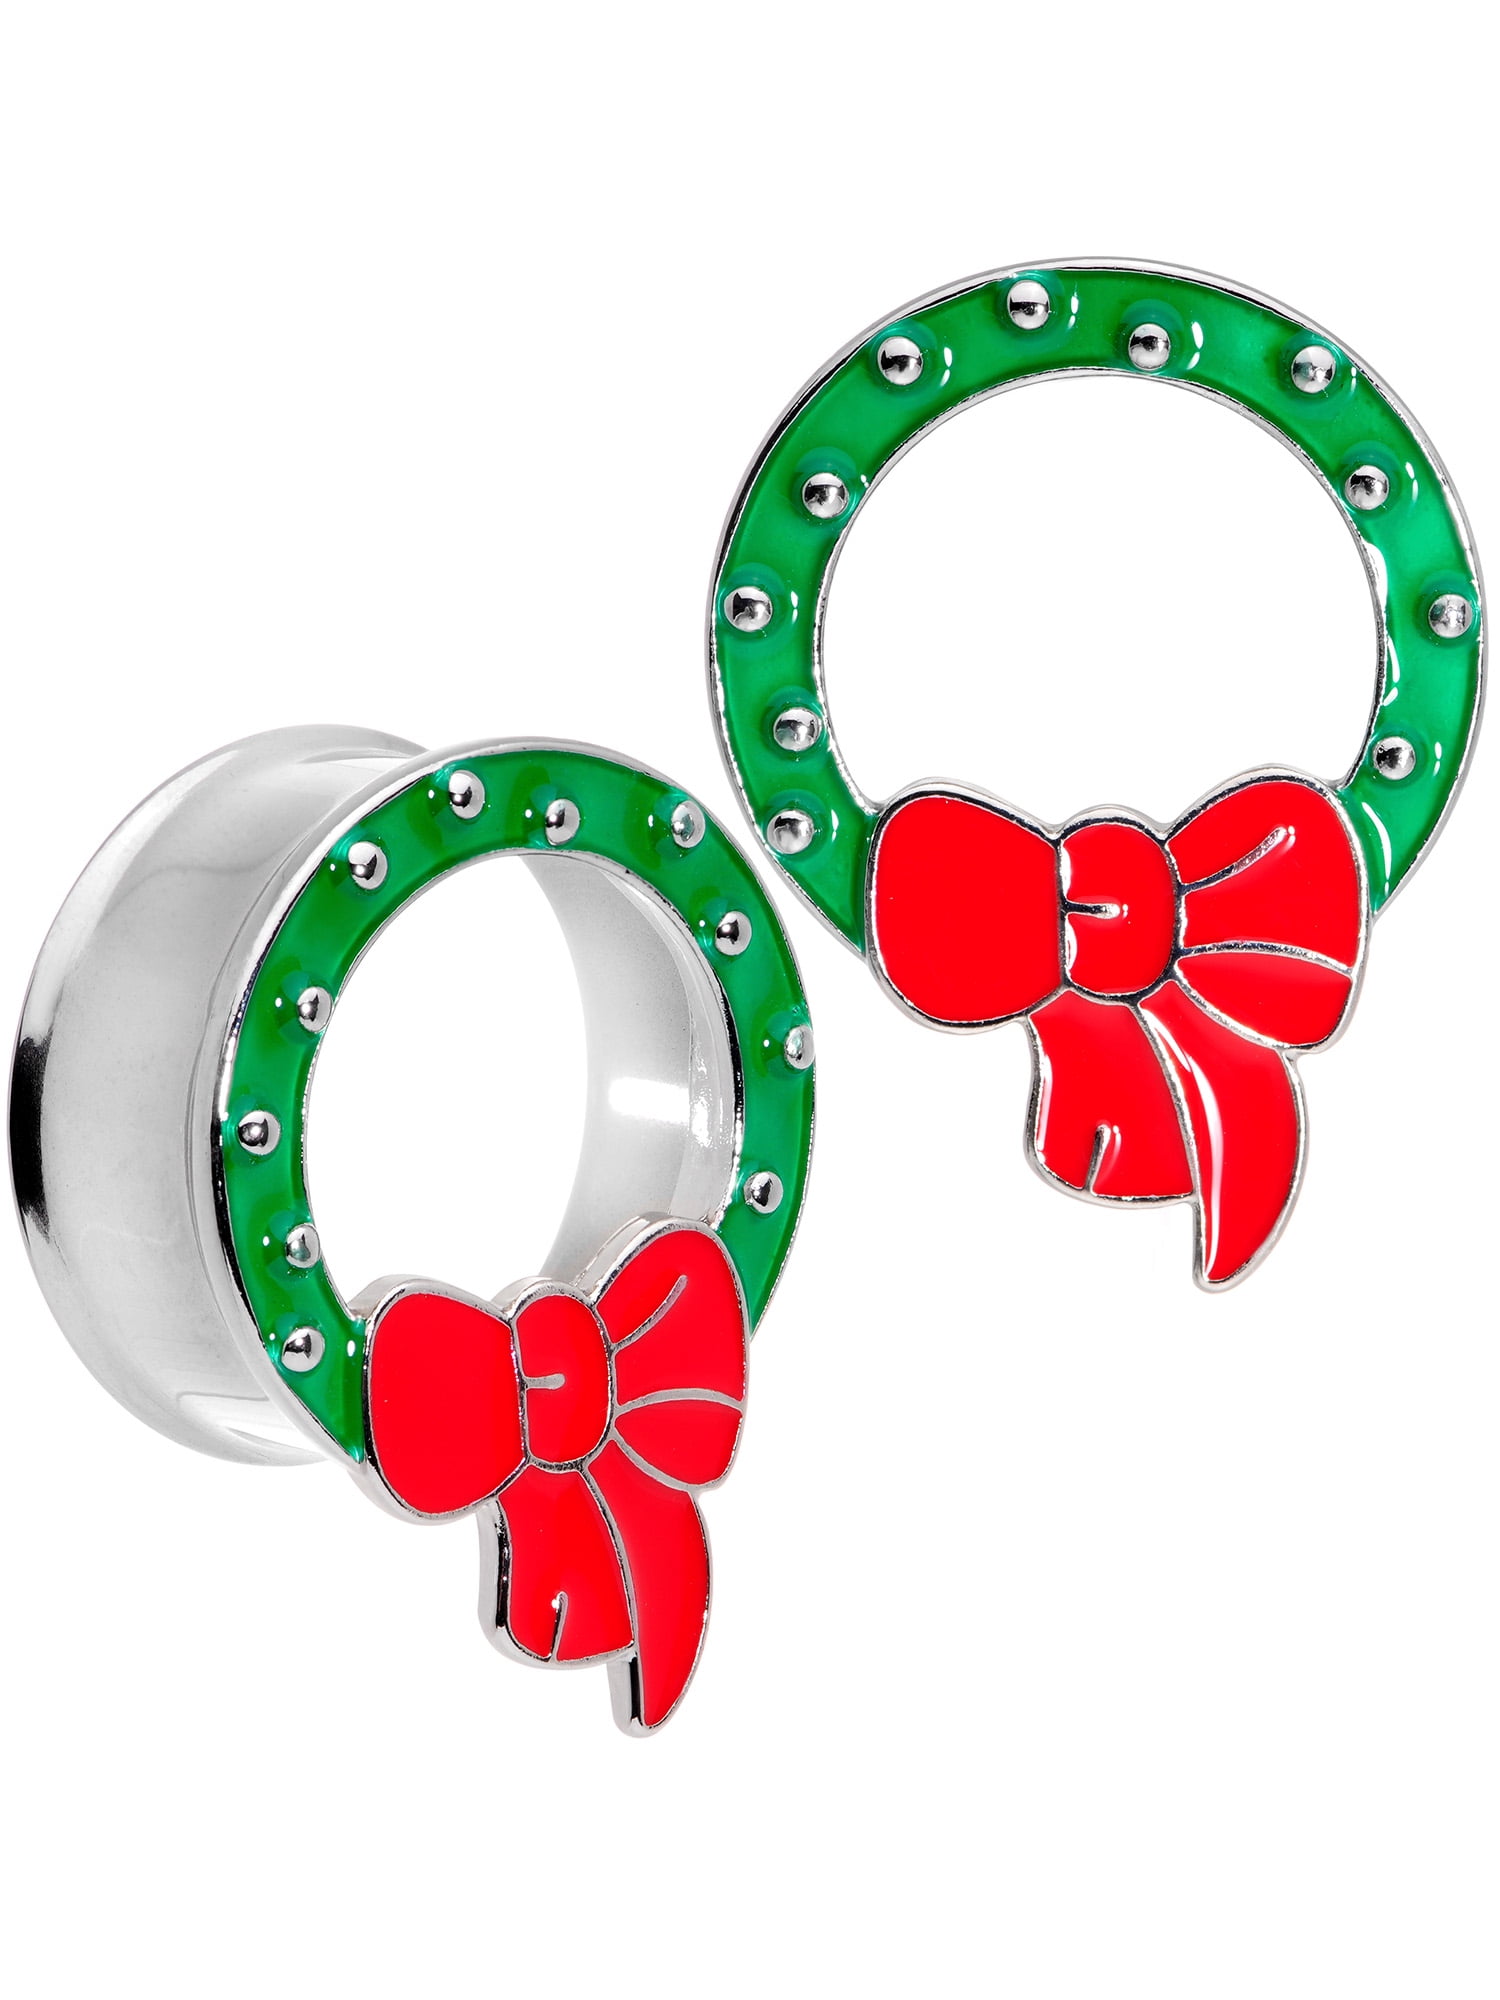 Body Candy 2Pc 316L Steel Double Flare Tunnel Plug Christmas Wreath Ear Plug Gauges Set of 2 6mm to 25mm 